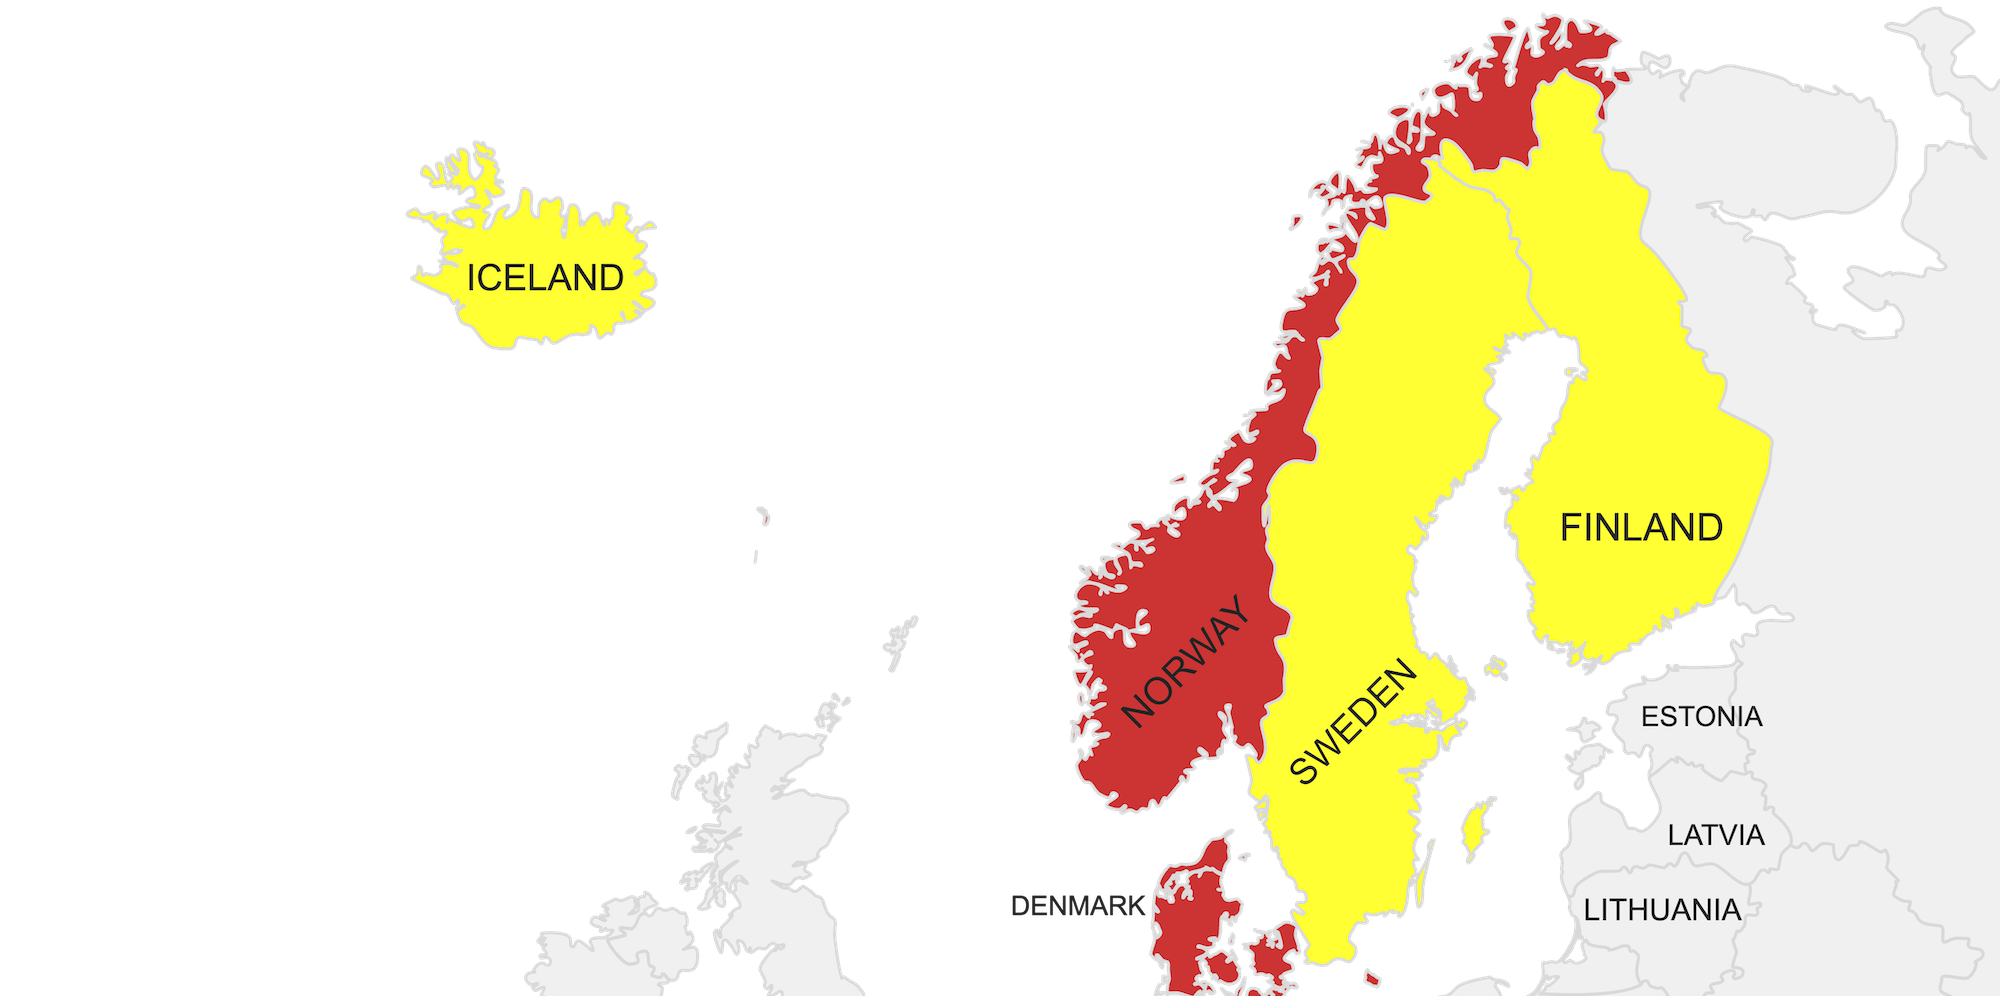 Country-guessing Europe's Nordic Countries